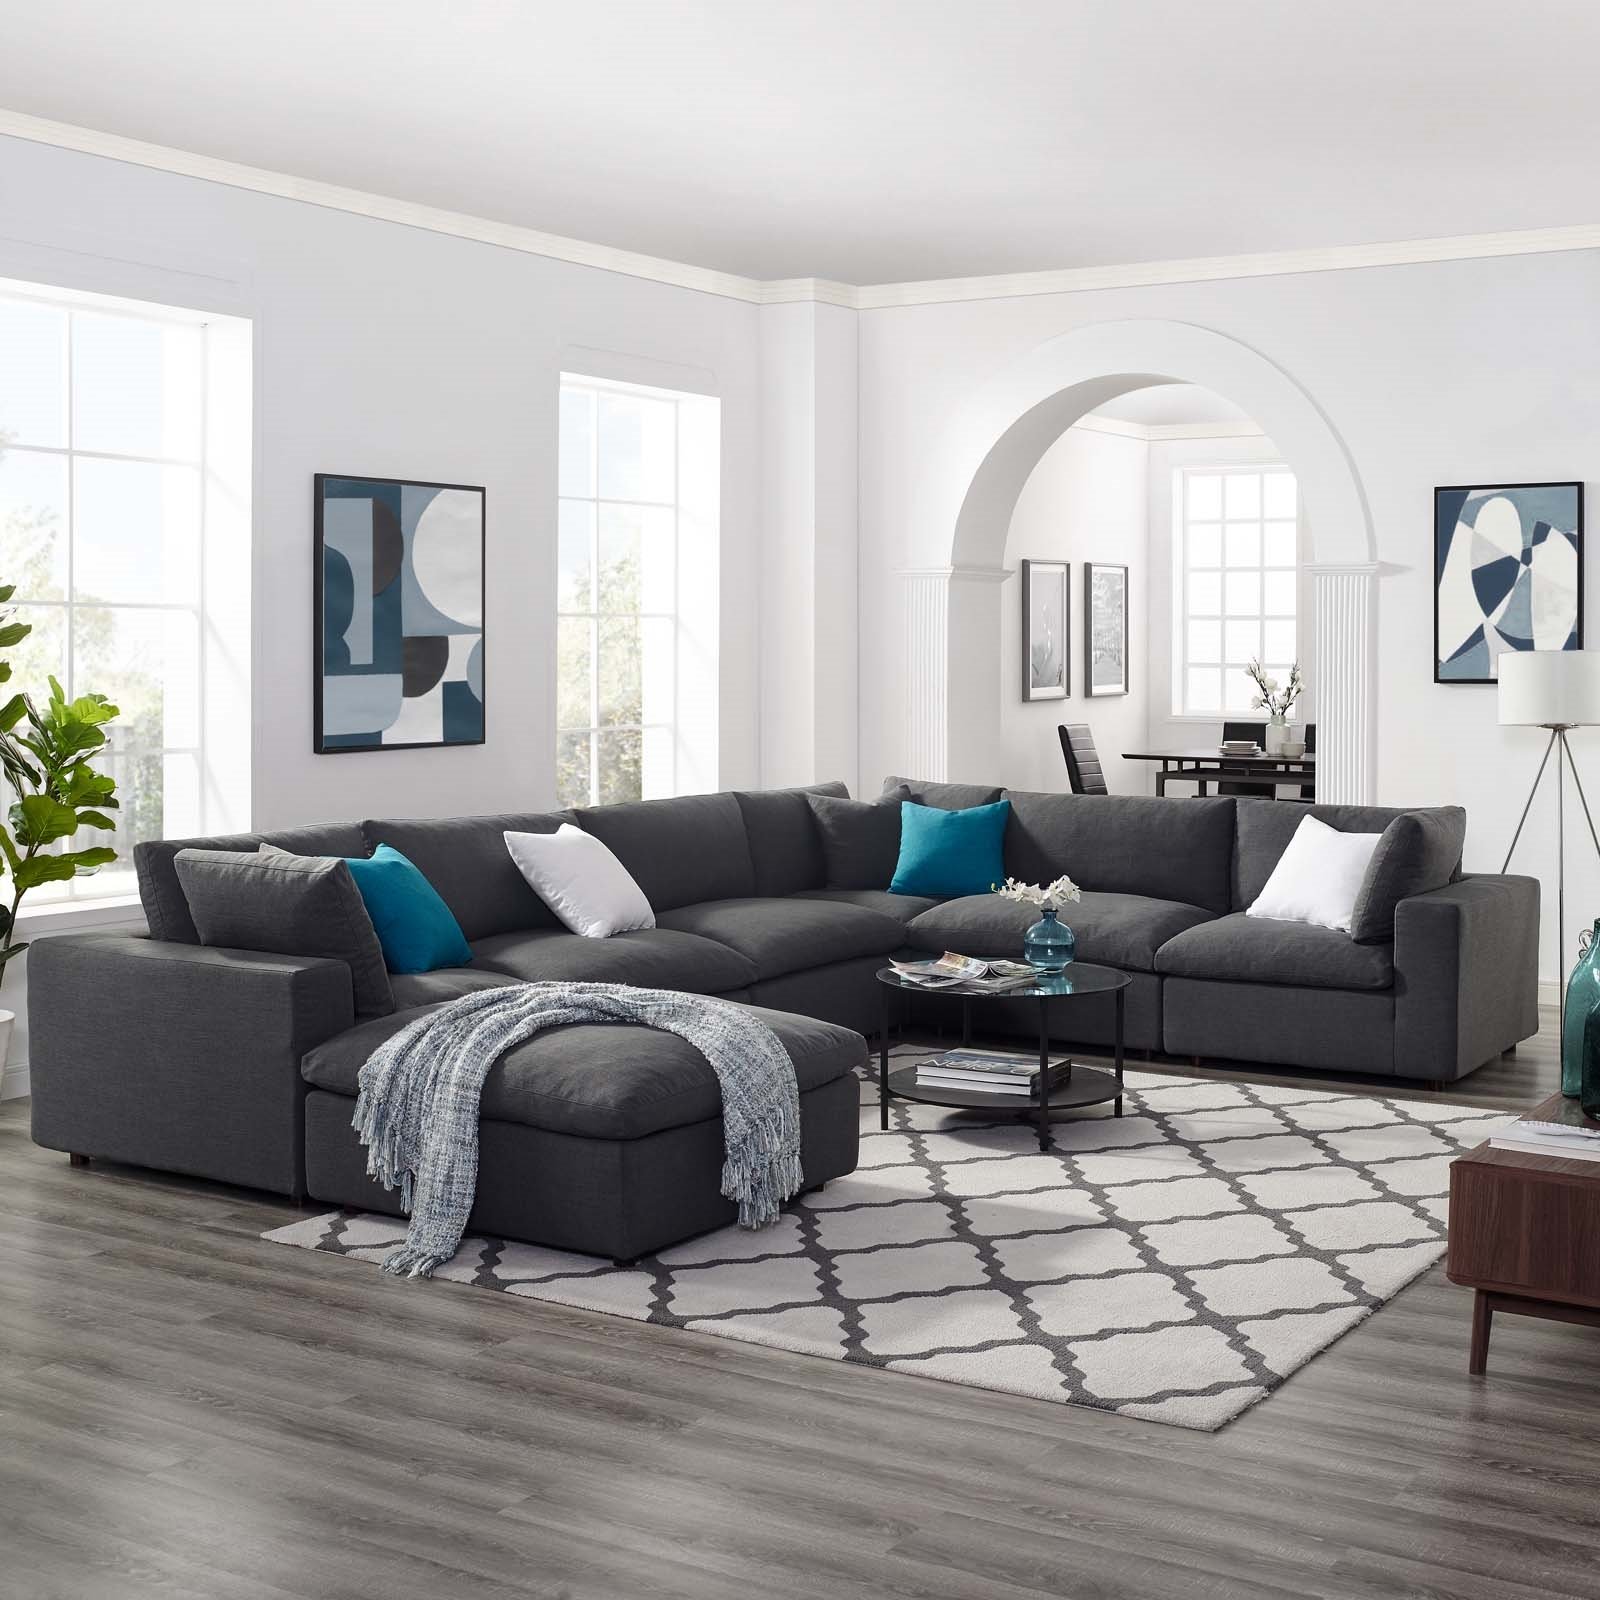 Sectional Sofa Set In Gray Hyme Furniture